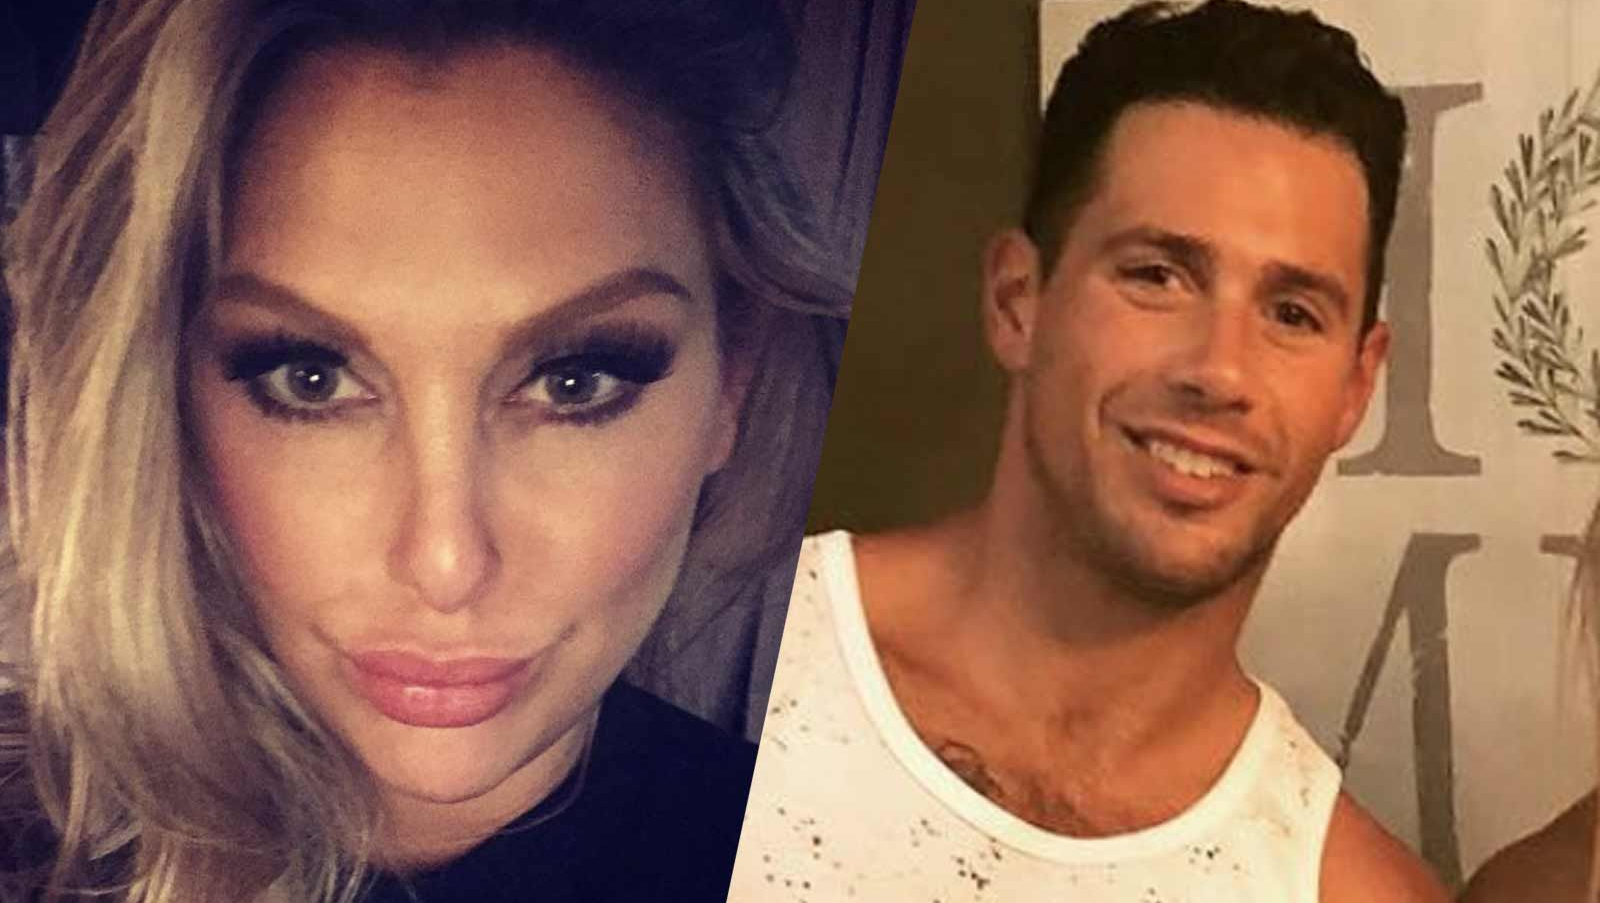 ‘RHOC’ Star Gina Kirschenheiter To Face Off With Ex-Husband Matt In Court Over Domestic Violence Accusations